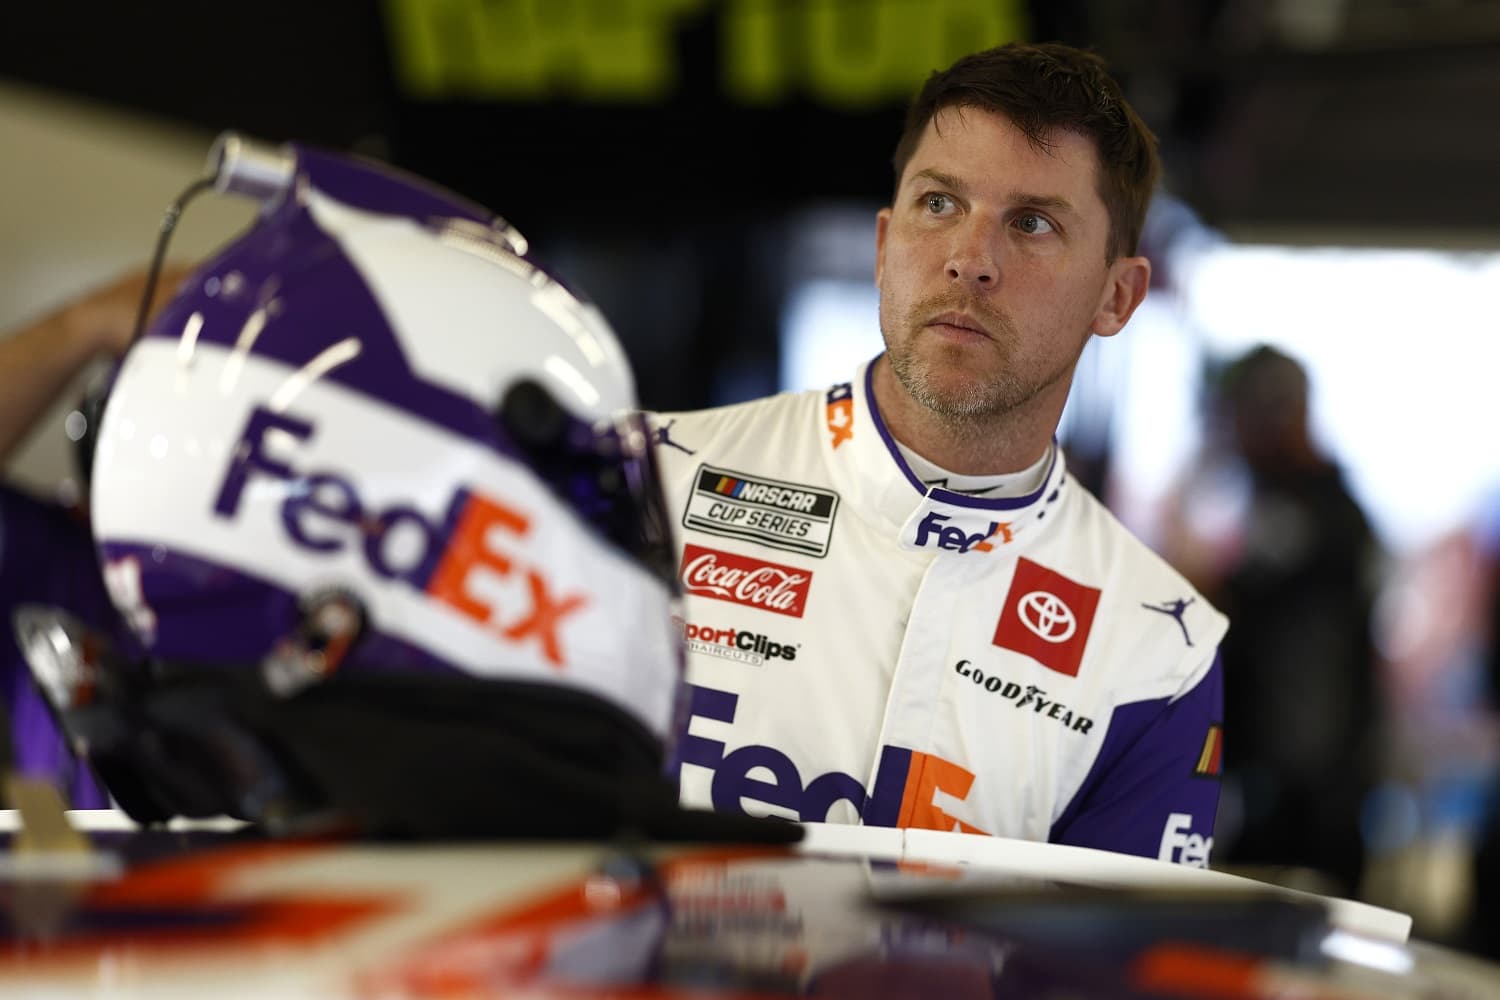 Denny Hamlin looks on in the garage area during practice for the NASCAR Cup Series Daytona 500 on Feb. 17, 2023. | Chris Graythen/Getty Images